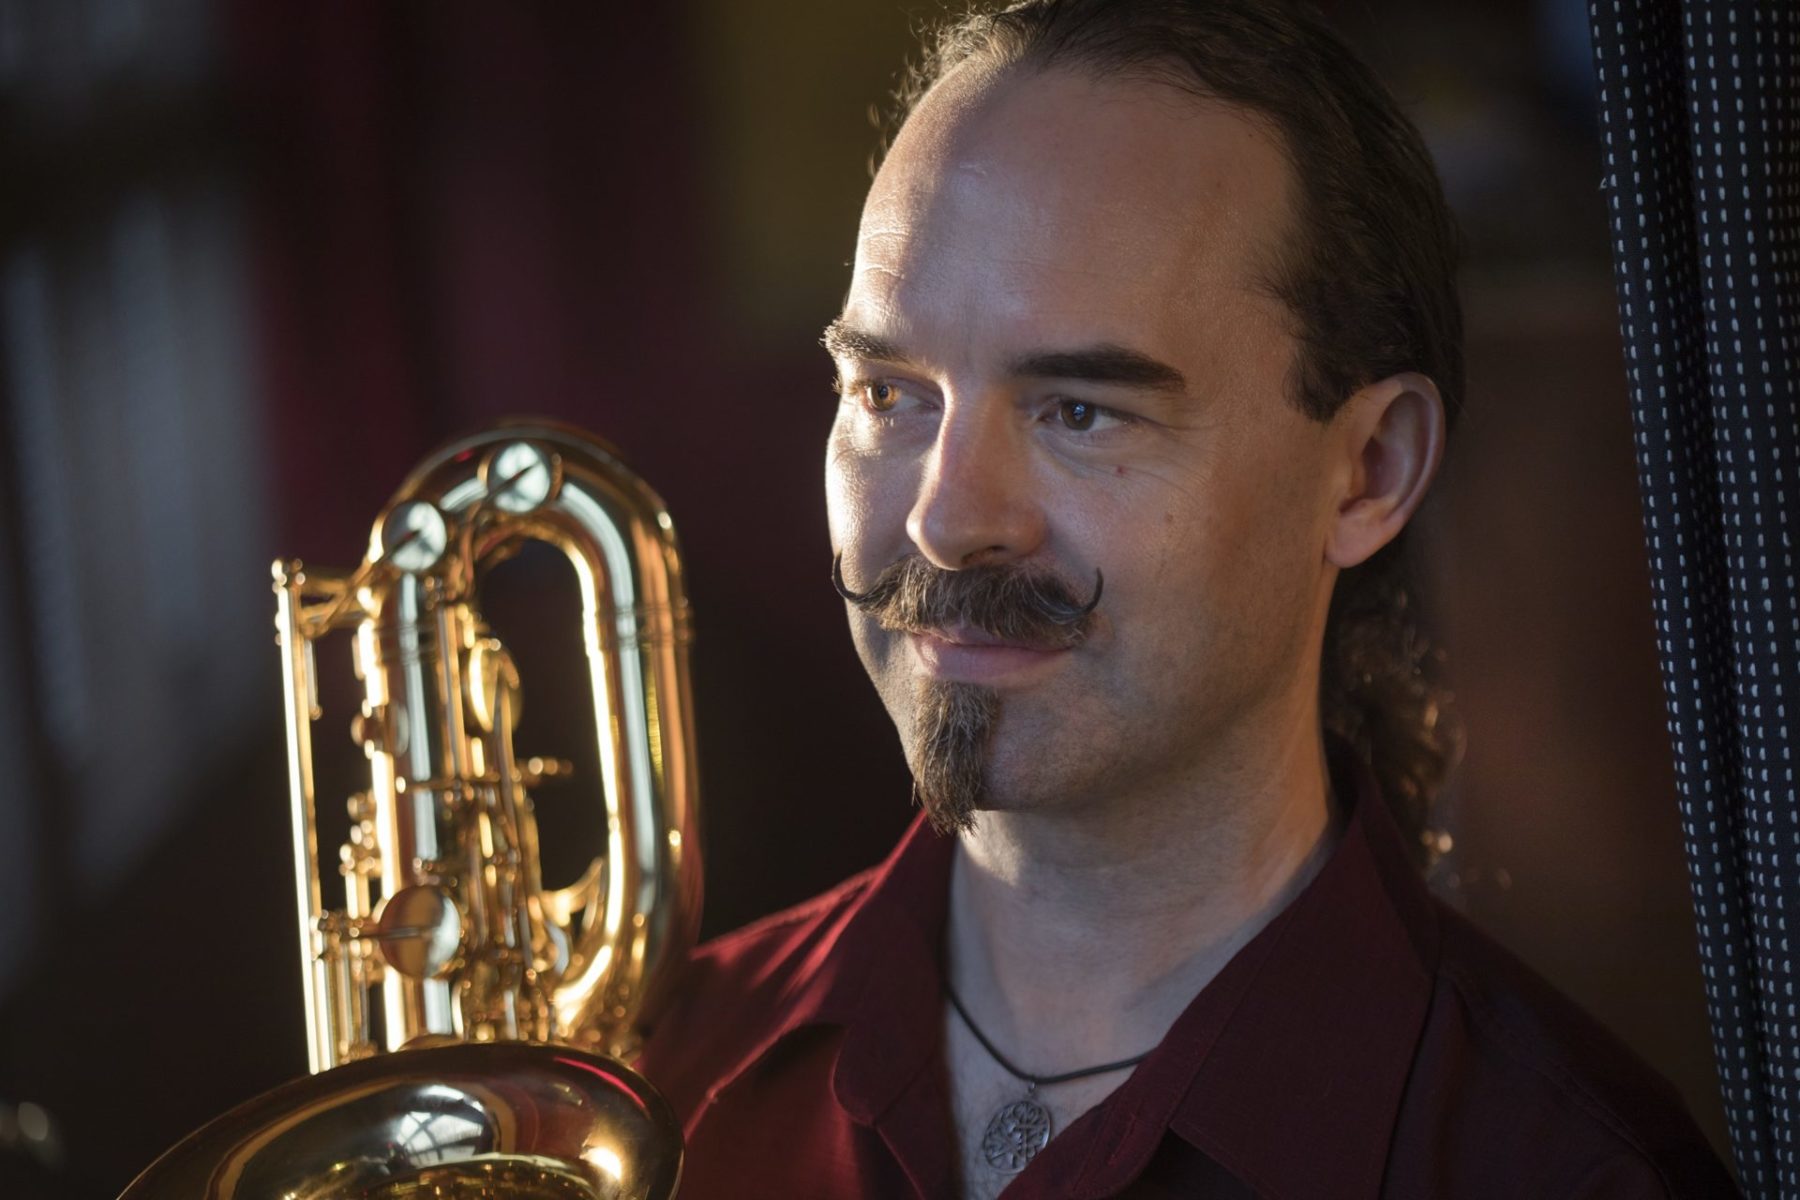 Colin MacDonald with a goatee in a red shirt posing with a saxophone